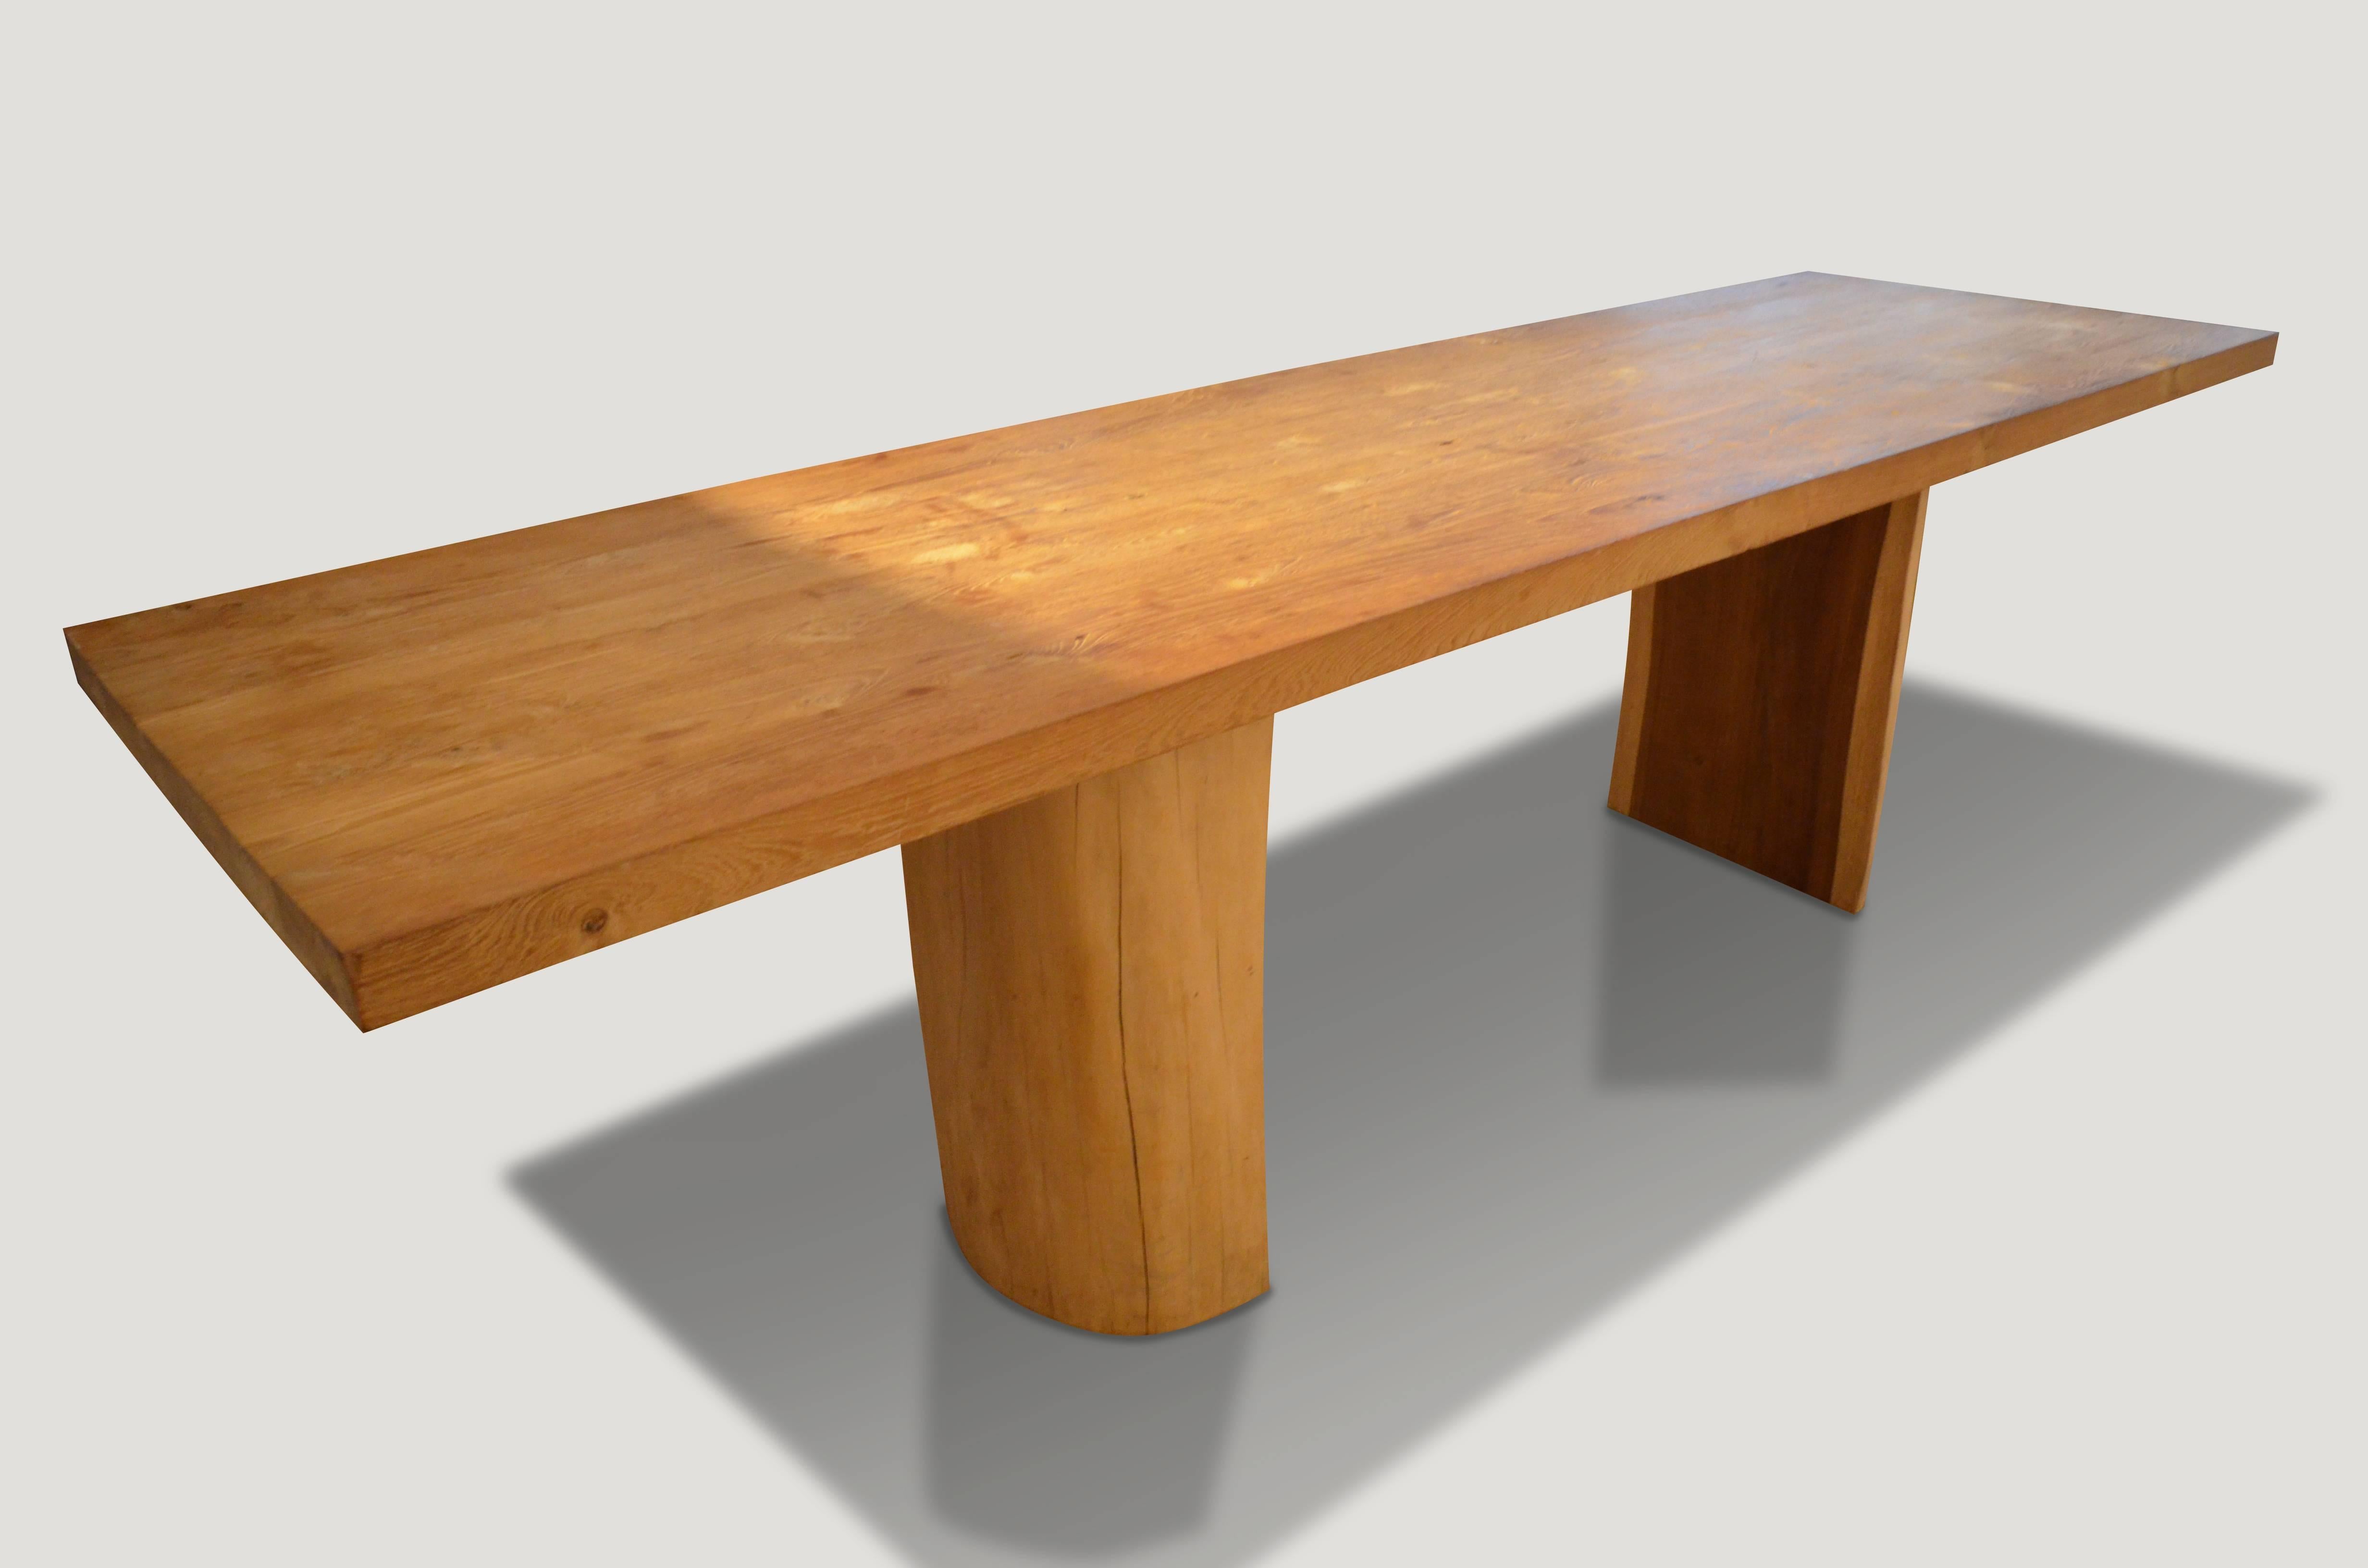 Reclaimed natural teak top dining table with sono wood base. Clean modern lines on this 2.5” thick top. Measures: 120 x 35 x 2.5